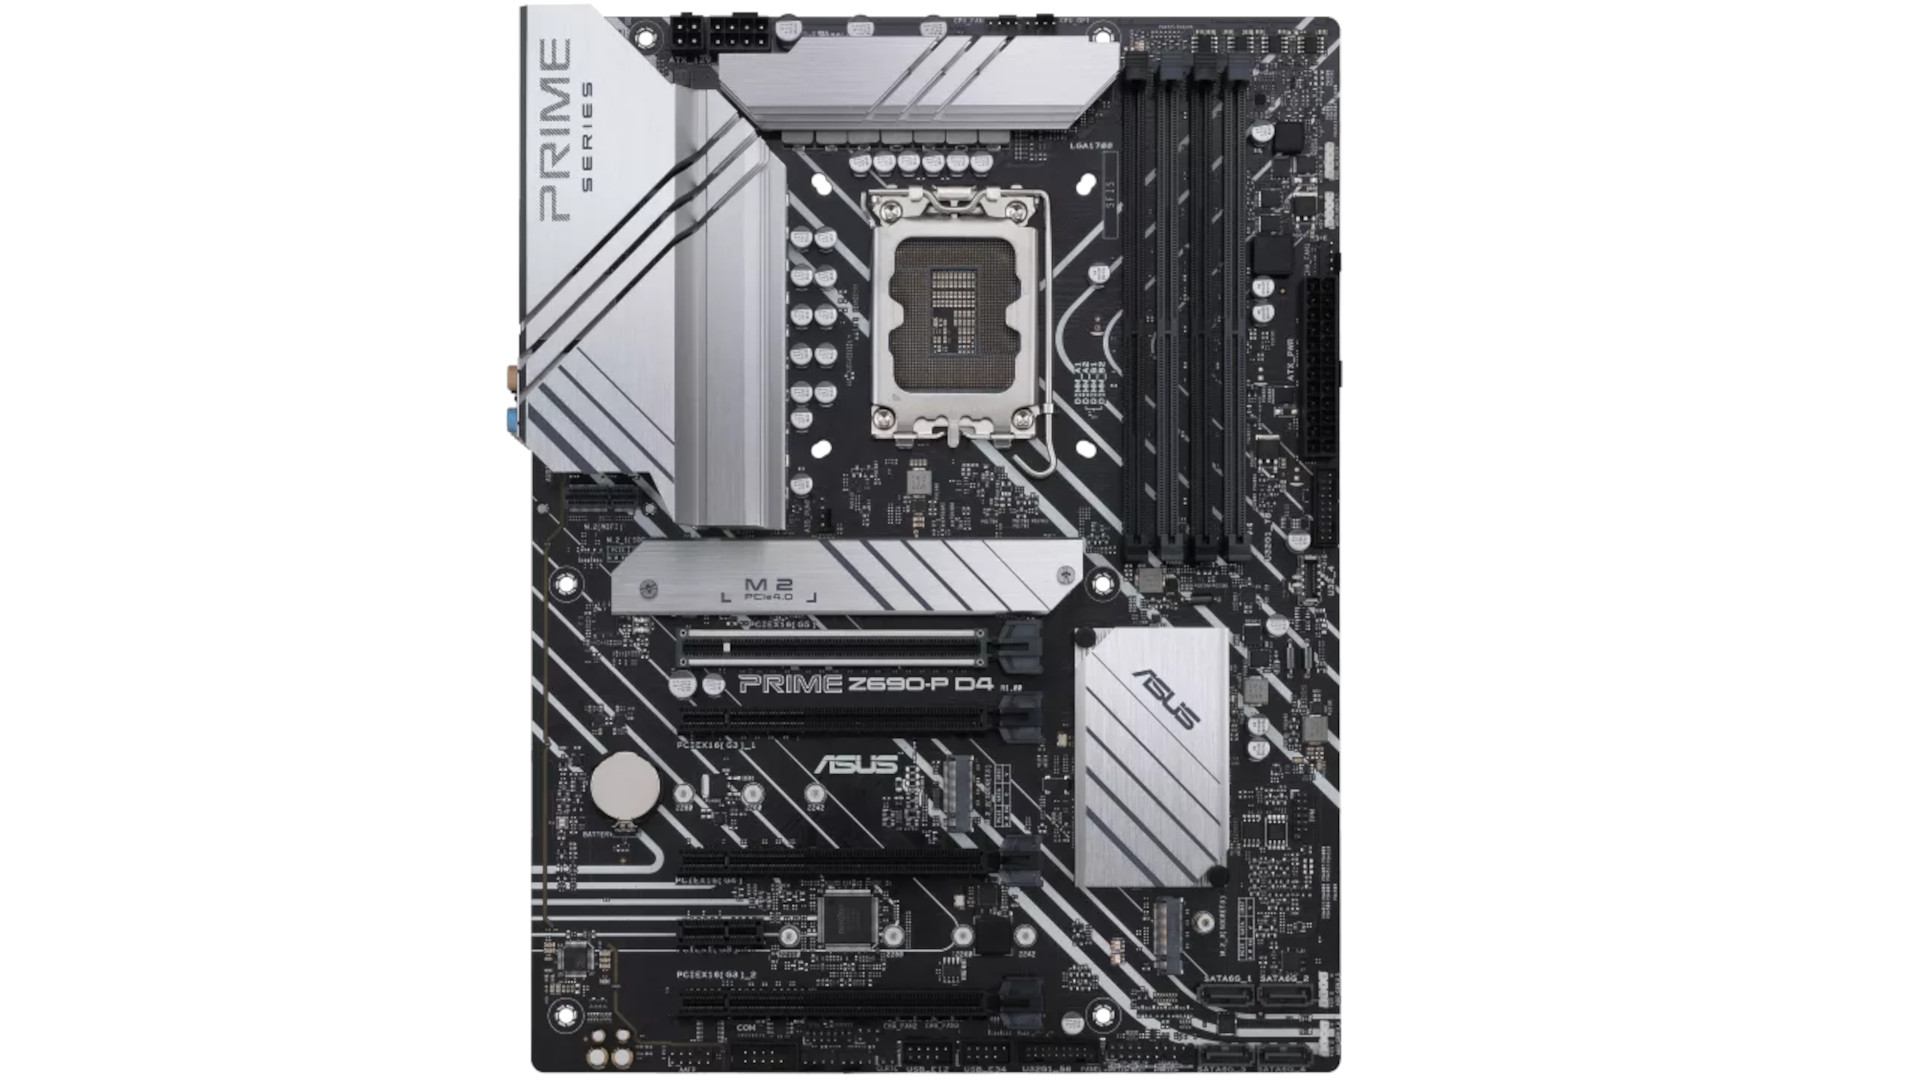 You are currently viewing ASUS Prime Z690-P D4 Motherboard Review